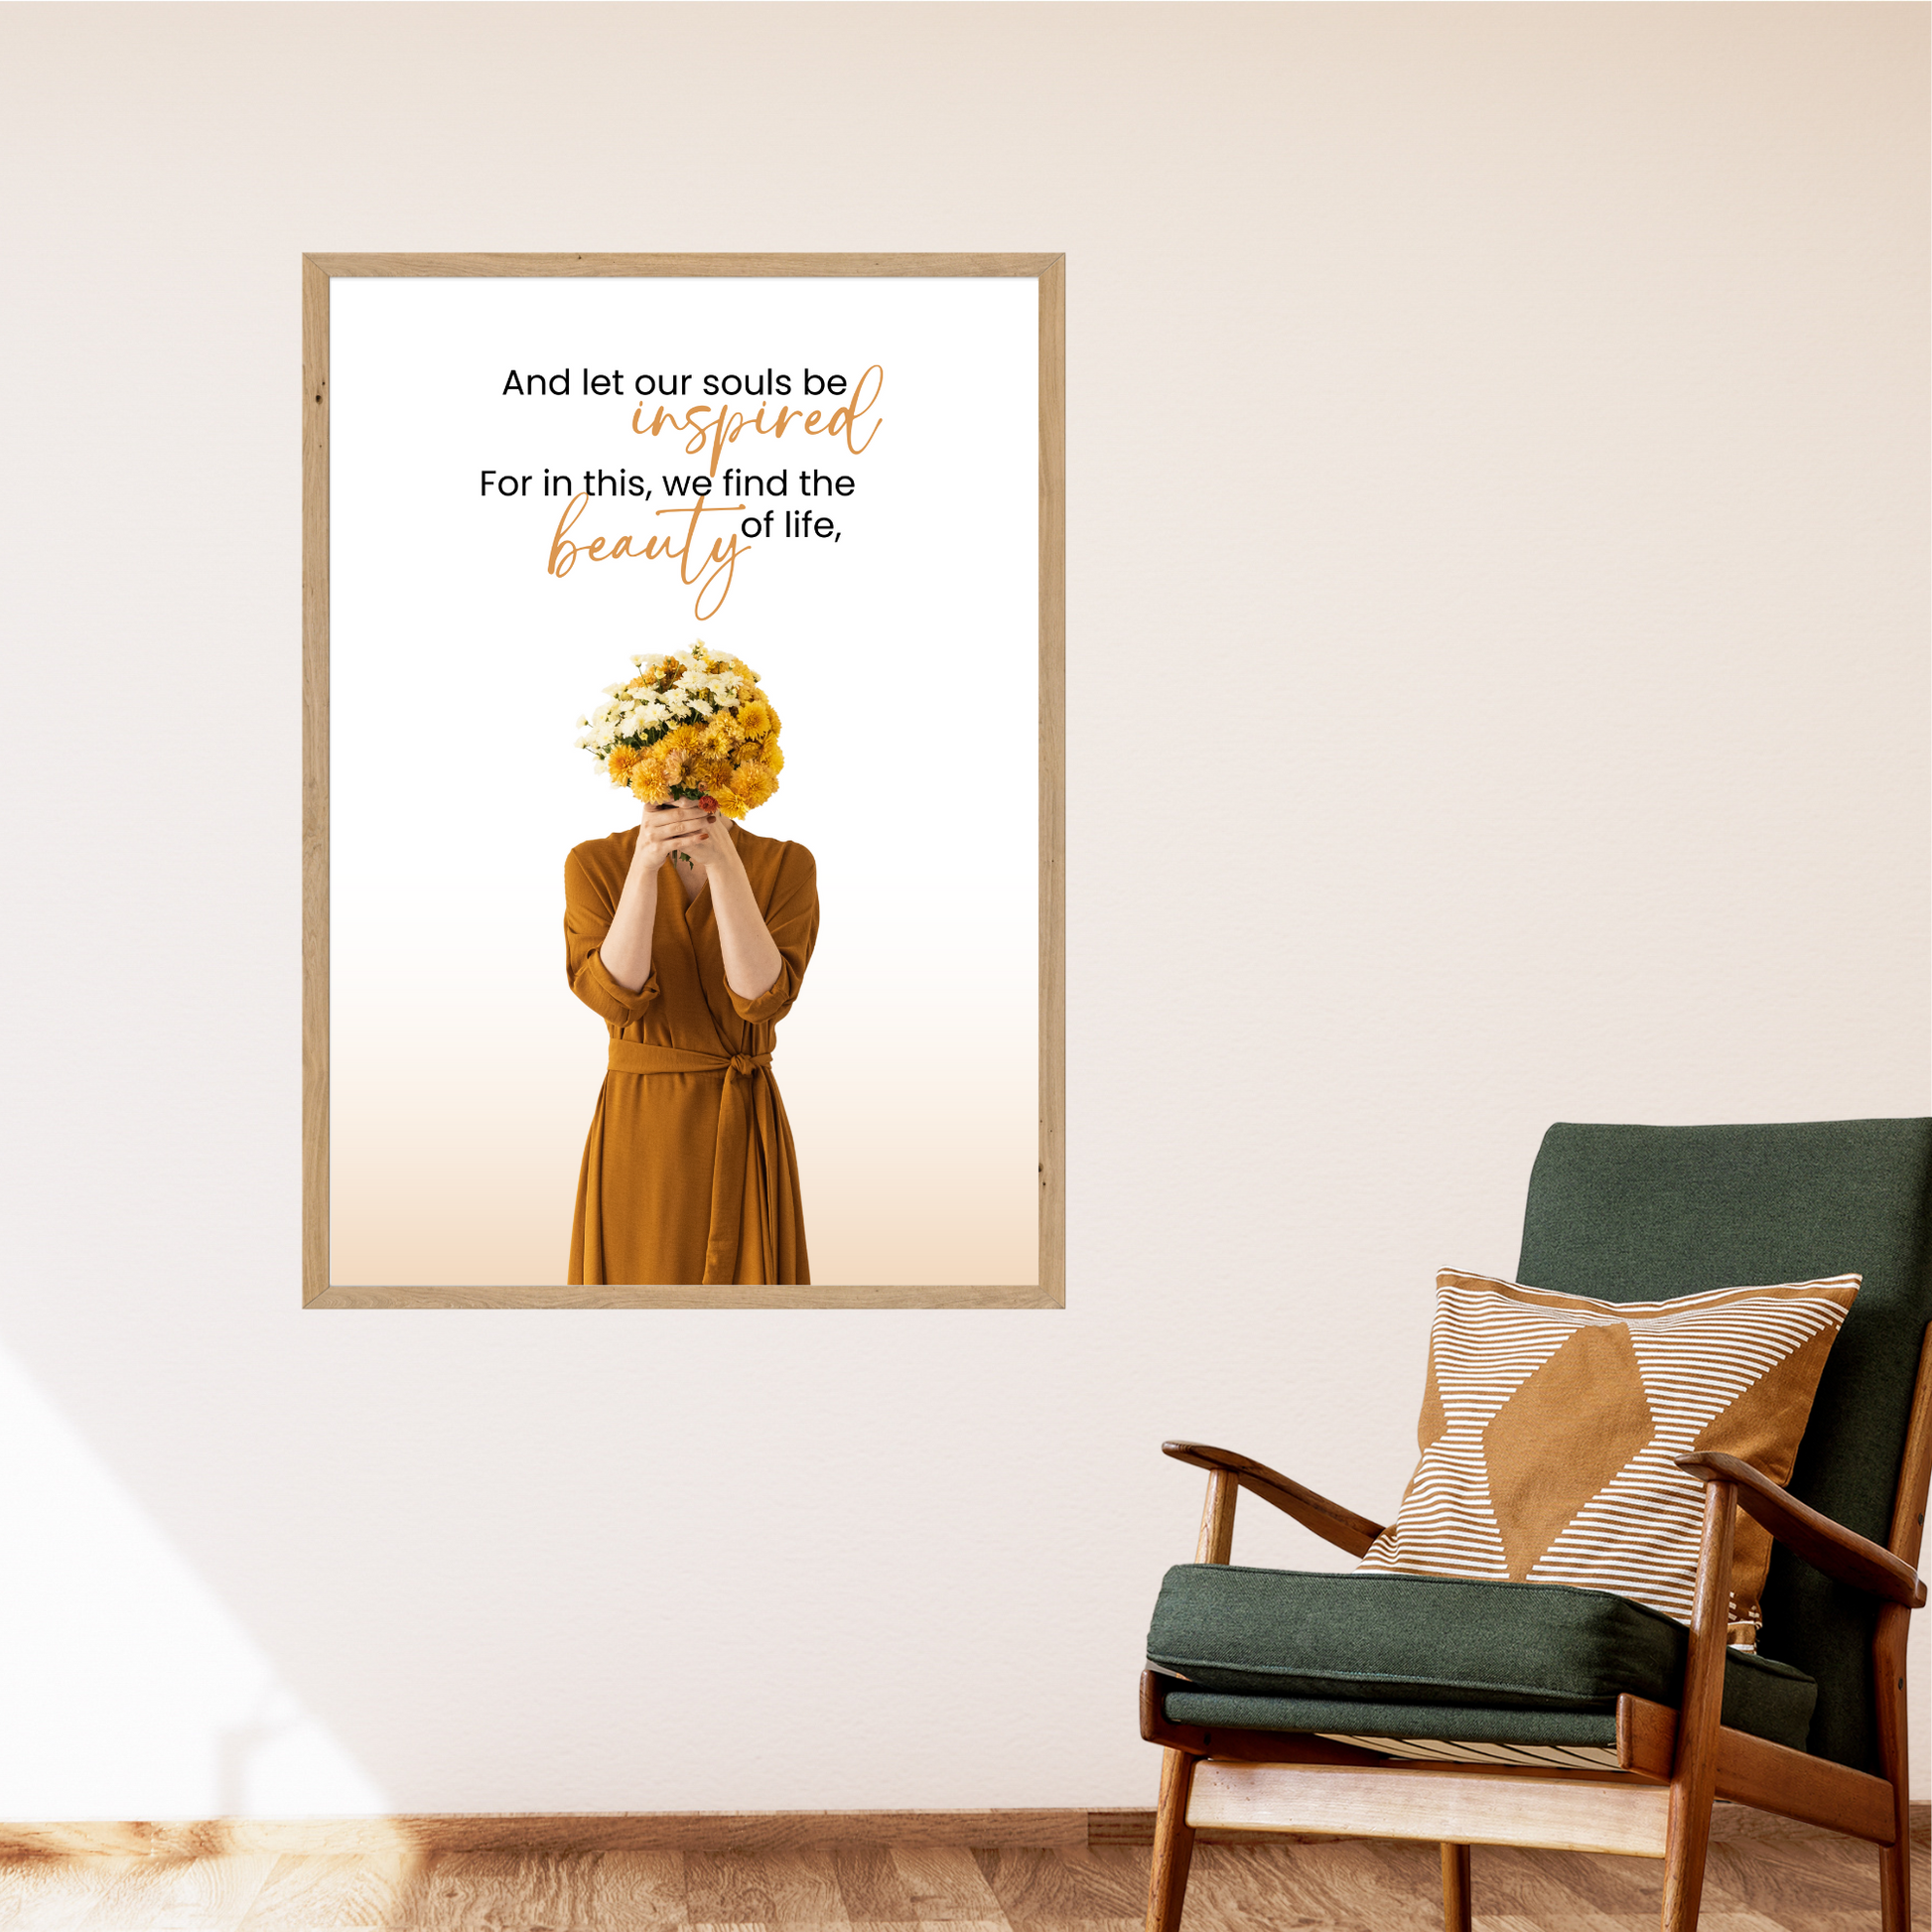  Art Printable of a Woman with Flowers in Reading Area